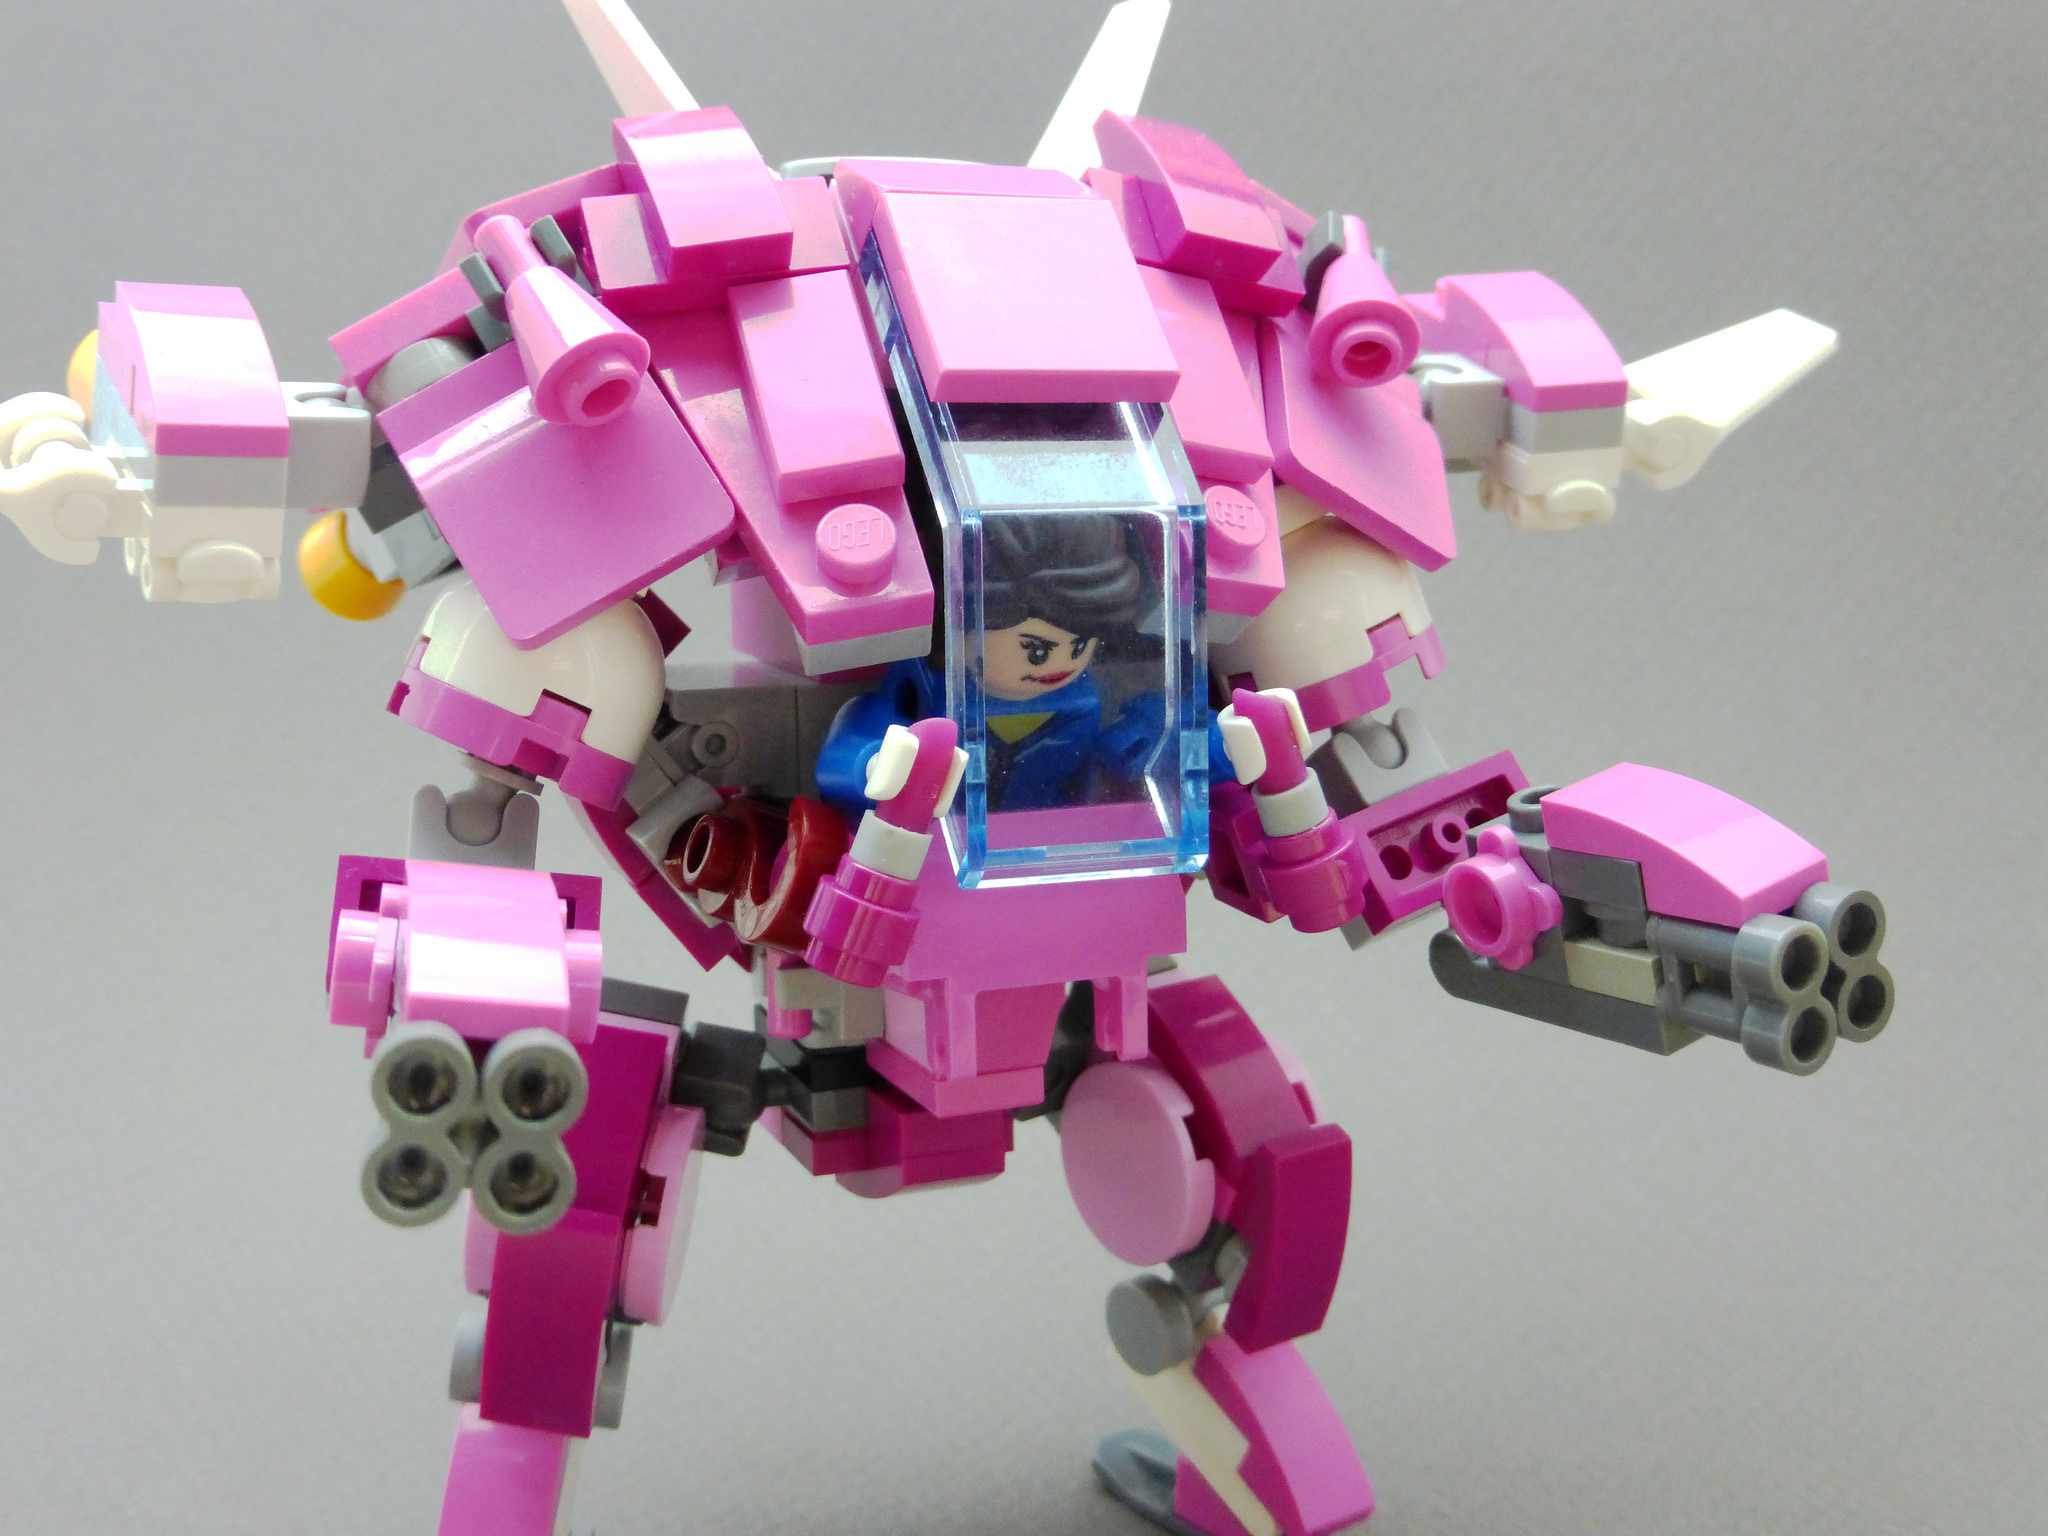 A Compelling Argument For Official Overwatch LEGO Sets